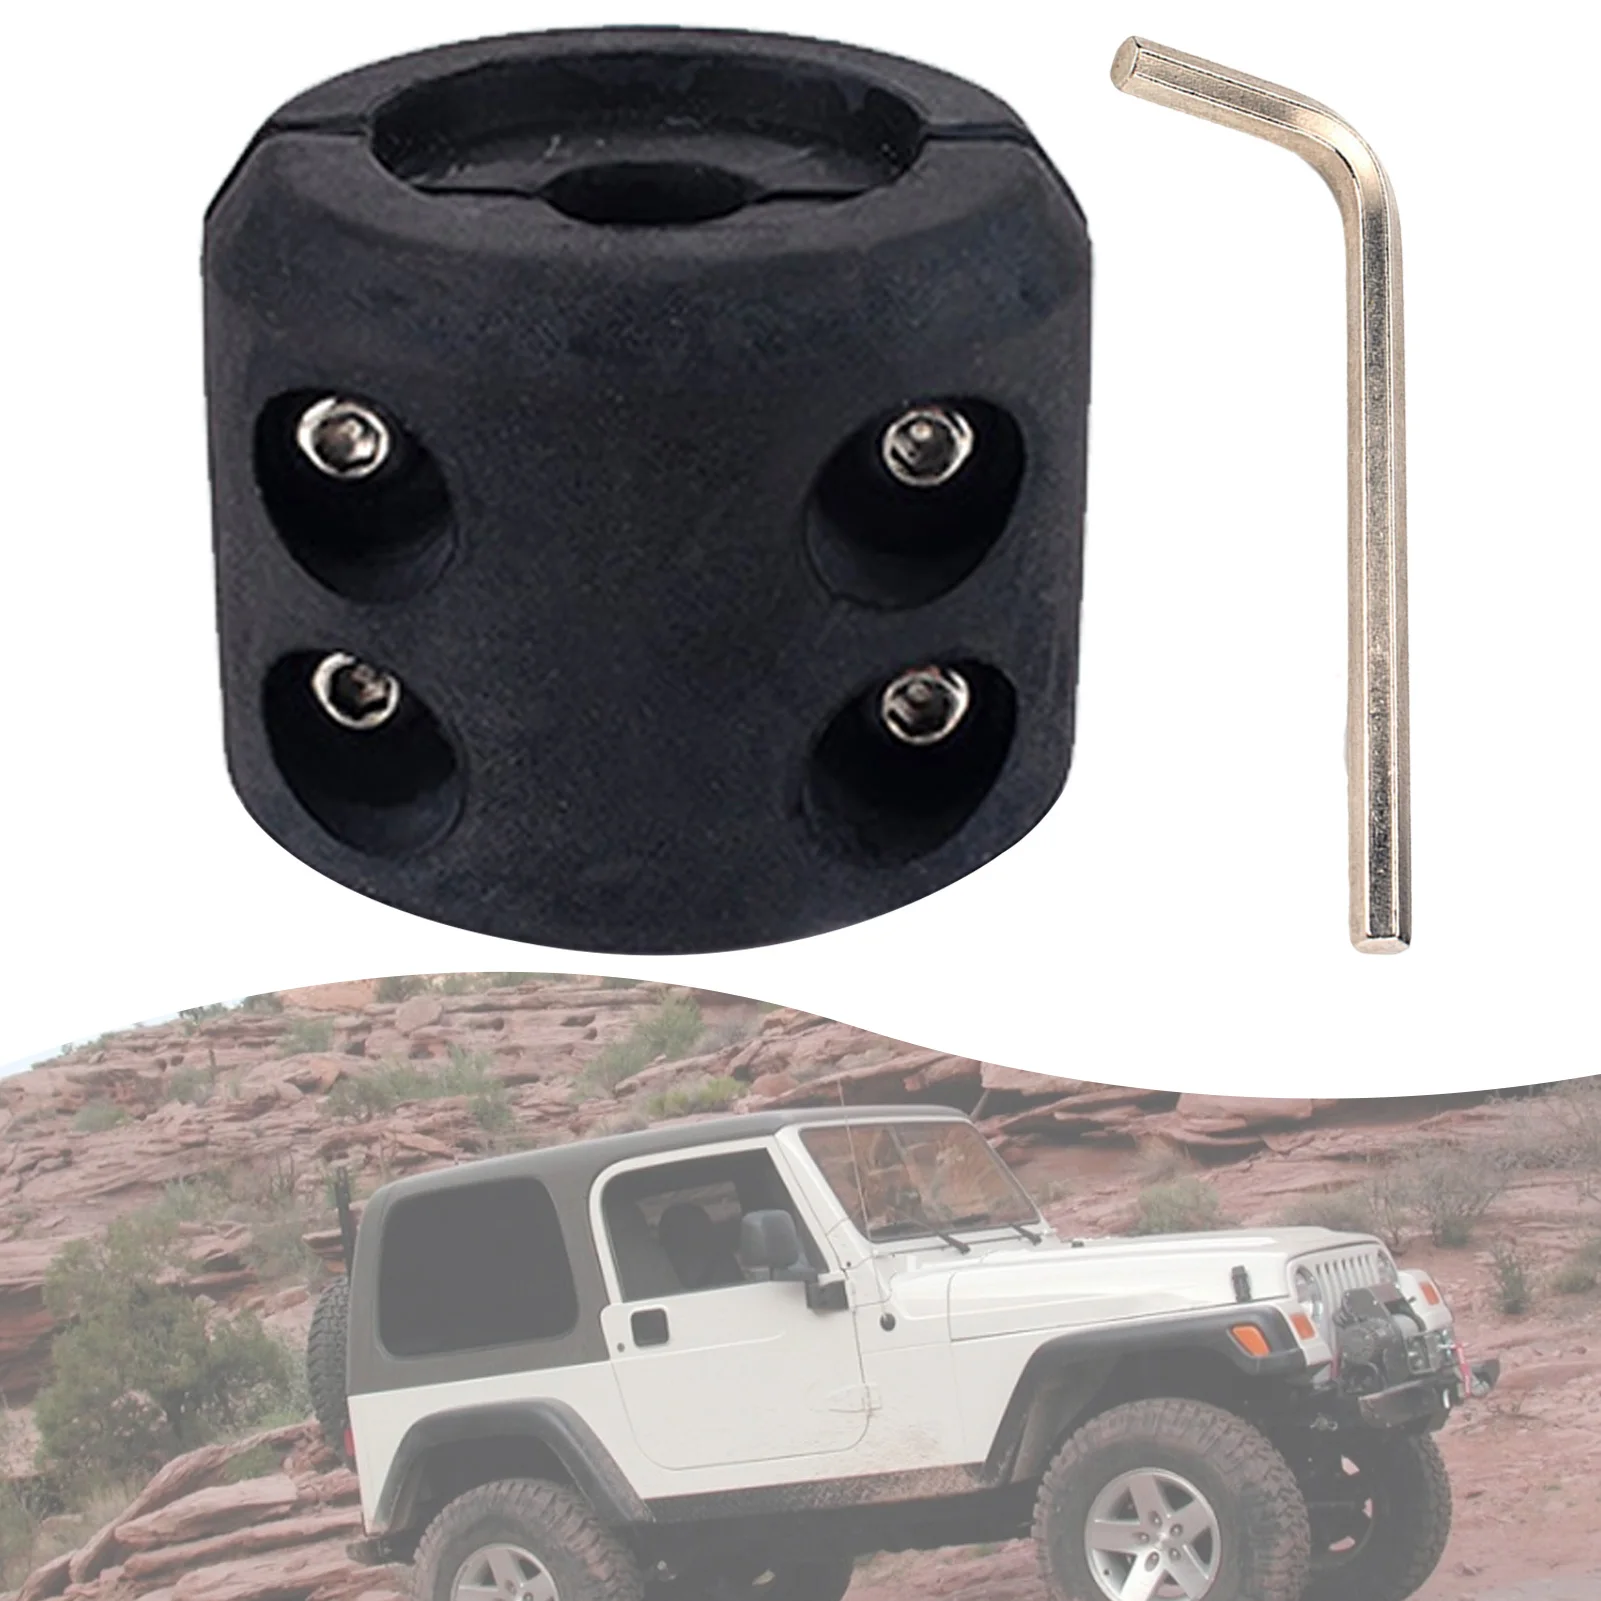 Winch Cable Hook Plug Rubber Cord Protector Suitable For Most ATV / UTV Winch Off-road Vehicles Winch Hook Stopper